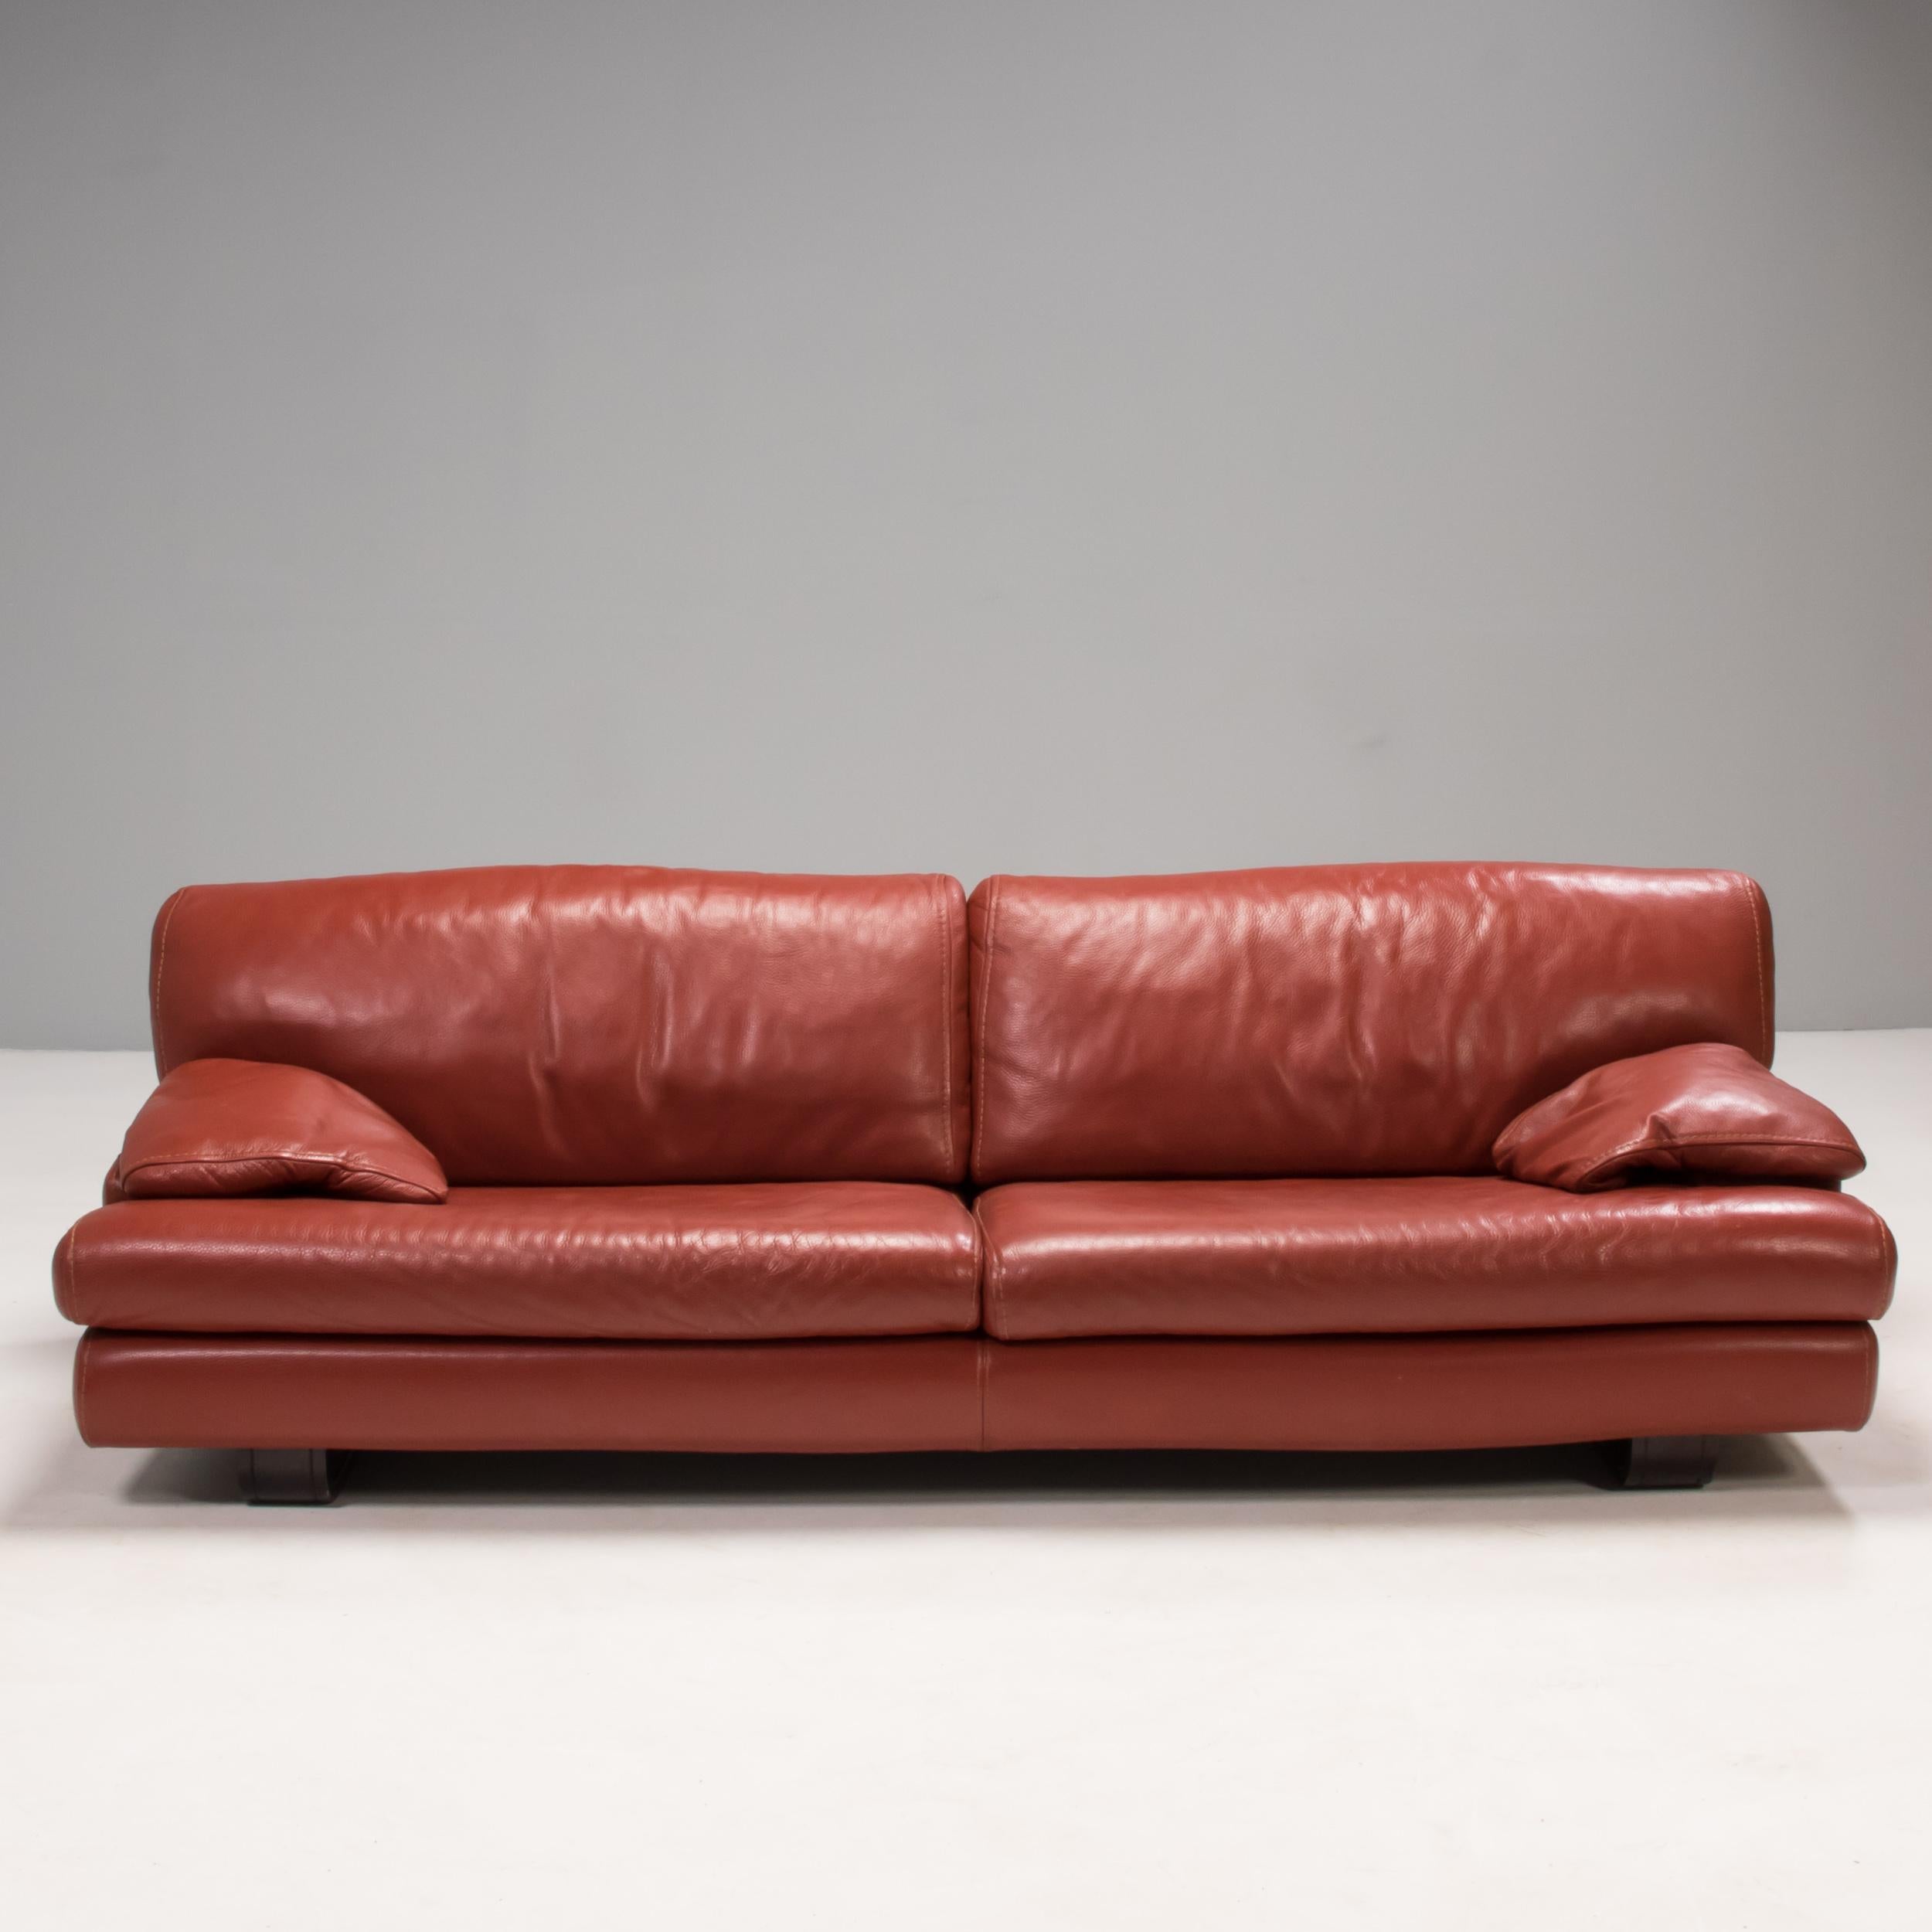 Designed by Roche Bobois, this sofa offers the ultimate in comfort with deep seating and soft red leather upholstery.

The sofa features two seat cushions and two back cushions with additional cushions which become the armrests, as well as a